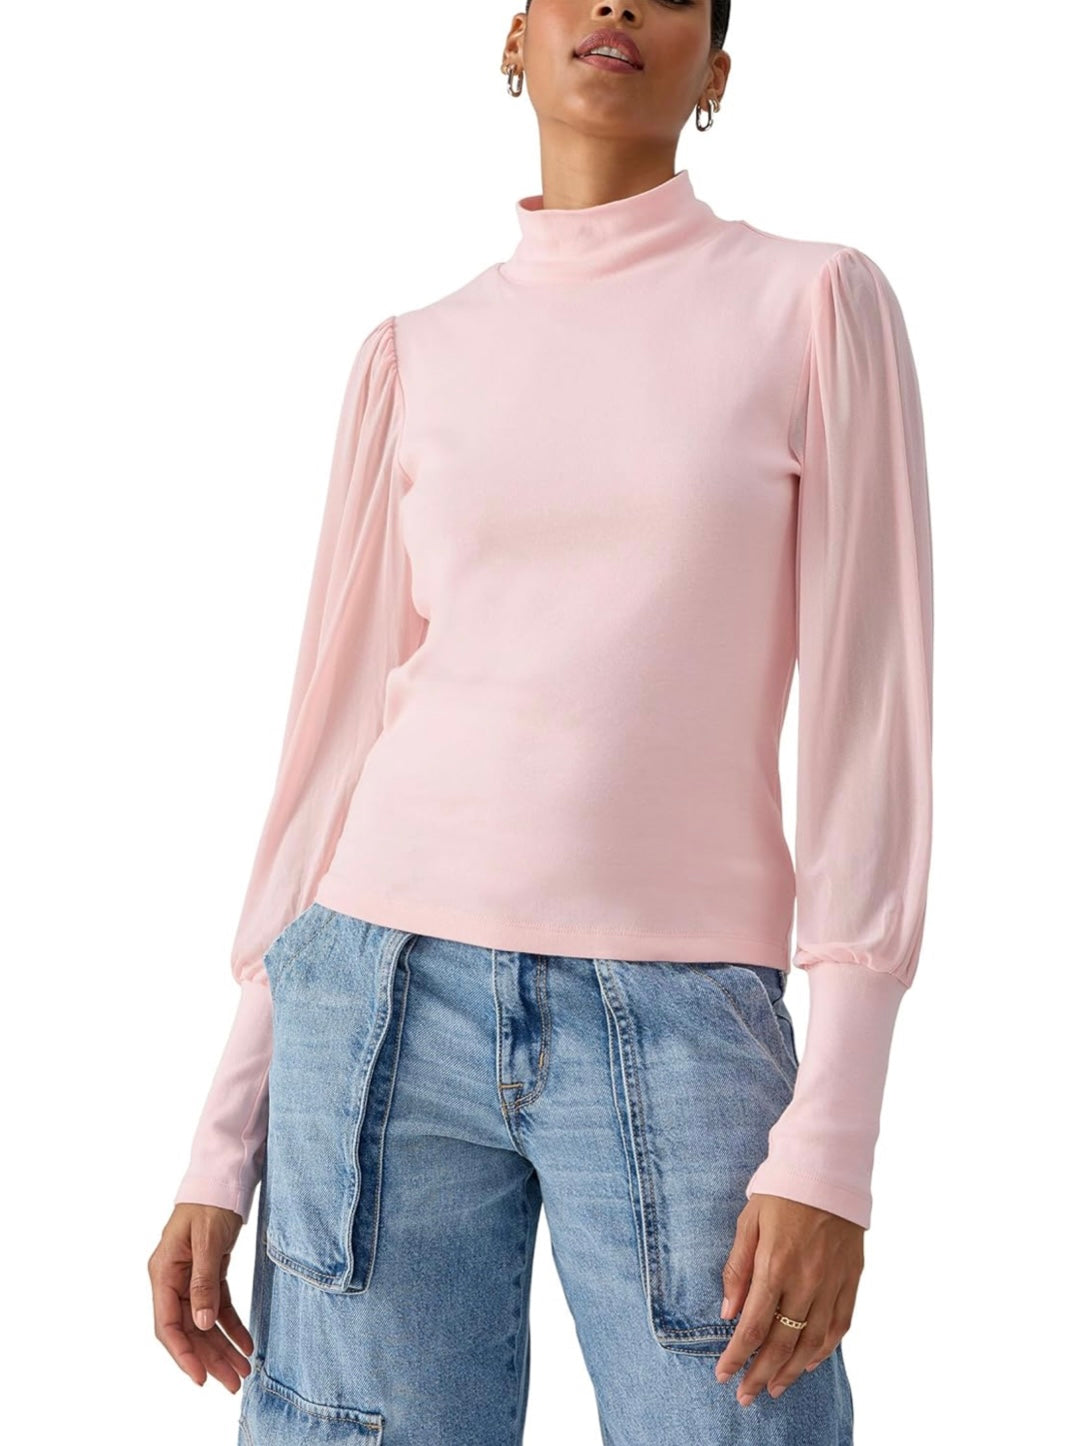 Sanctuary On My Mind Mesh Sleeve Top in Porcelain Pink